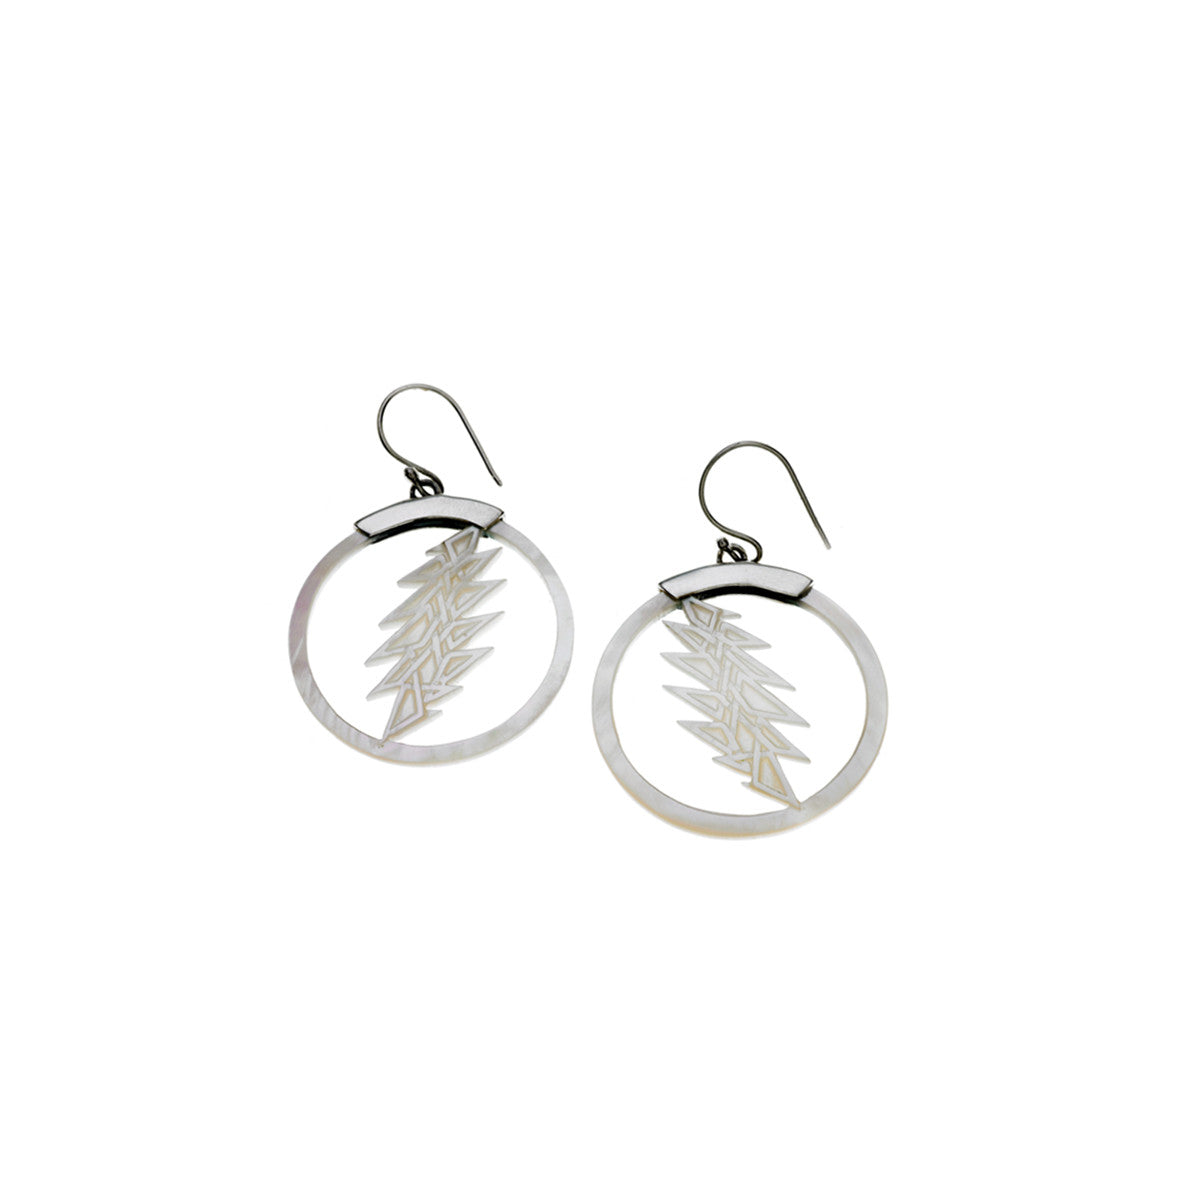 13 Point Lightening Bolt Sterling Silver Mother Of Pearl Drop Earring - Cynthia Gale New York - 1